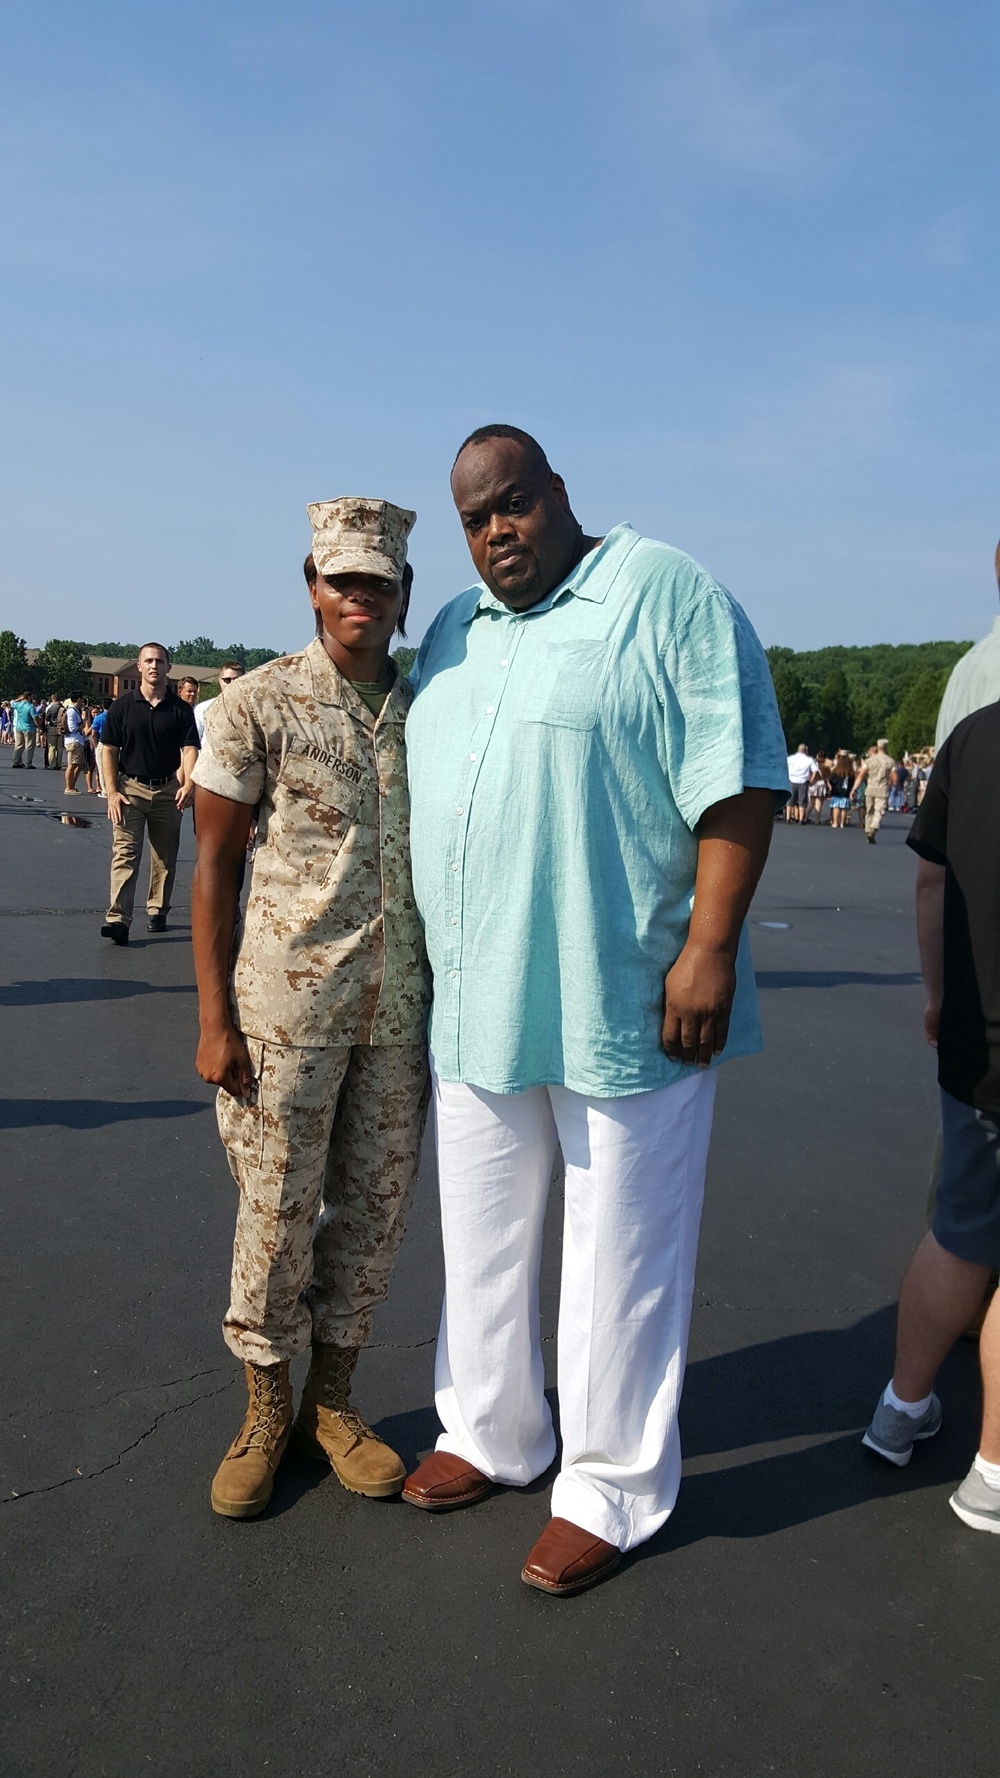 Marine lawyer uses track, determination to overcome adversity